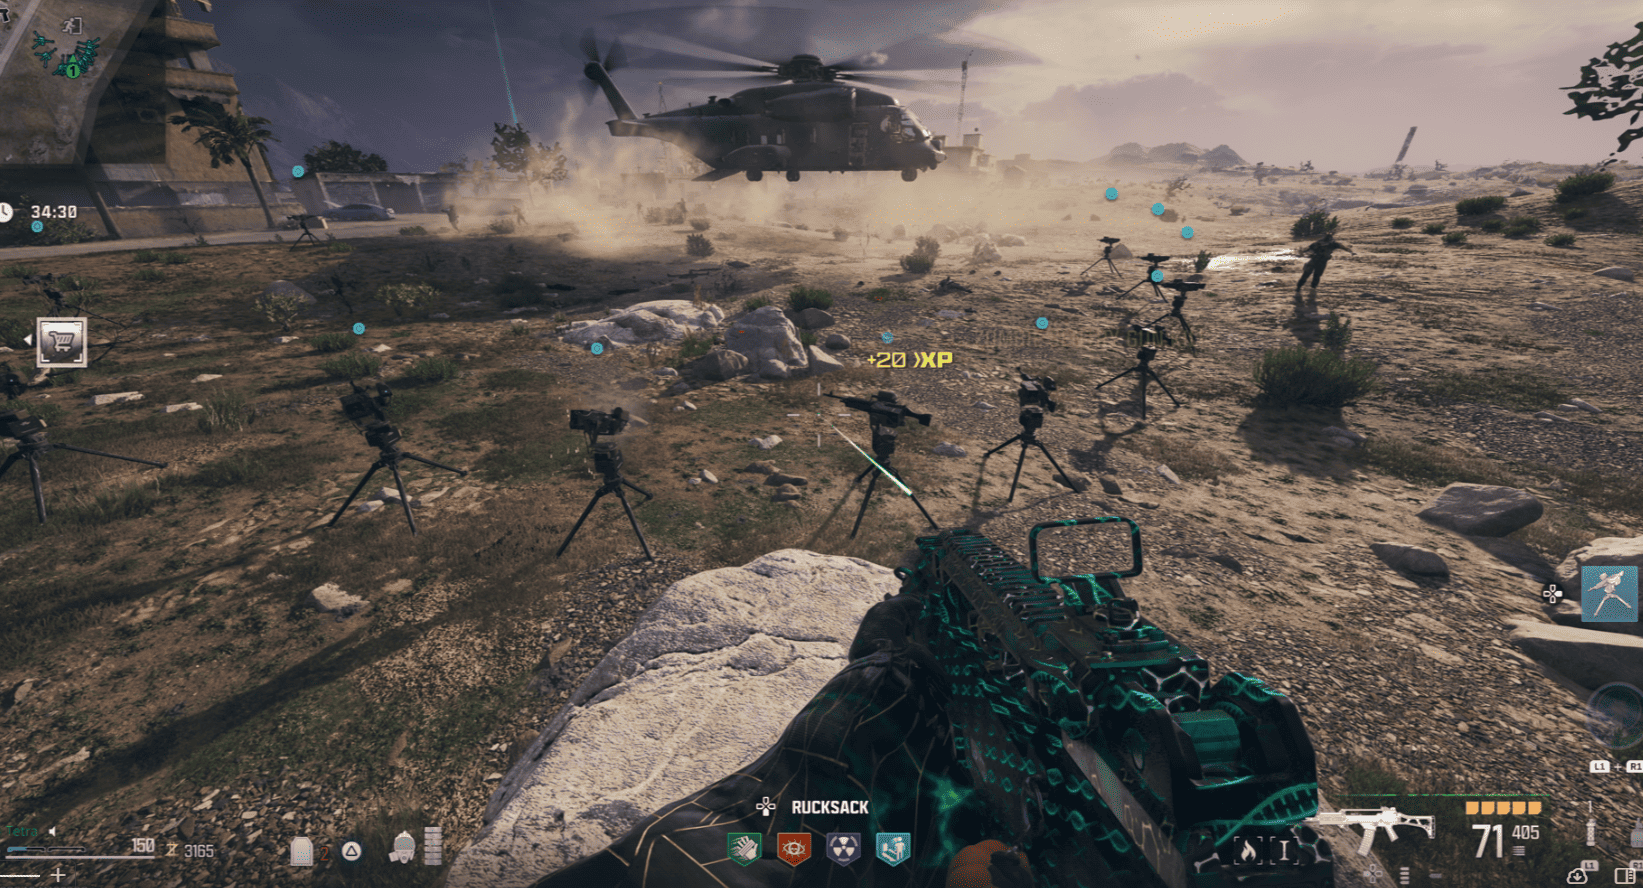 A thrilling screenshot of a zombie-infested video game with a helicopter, showcasing the intense action and excitement as players combat hordes of undead.